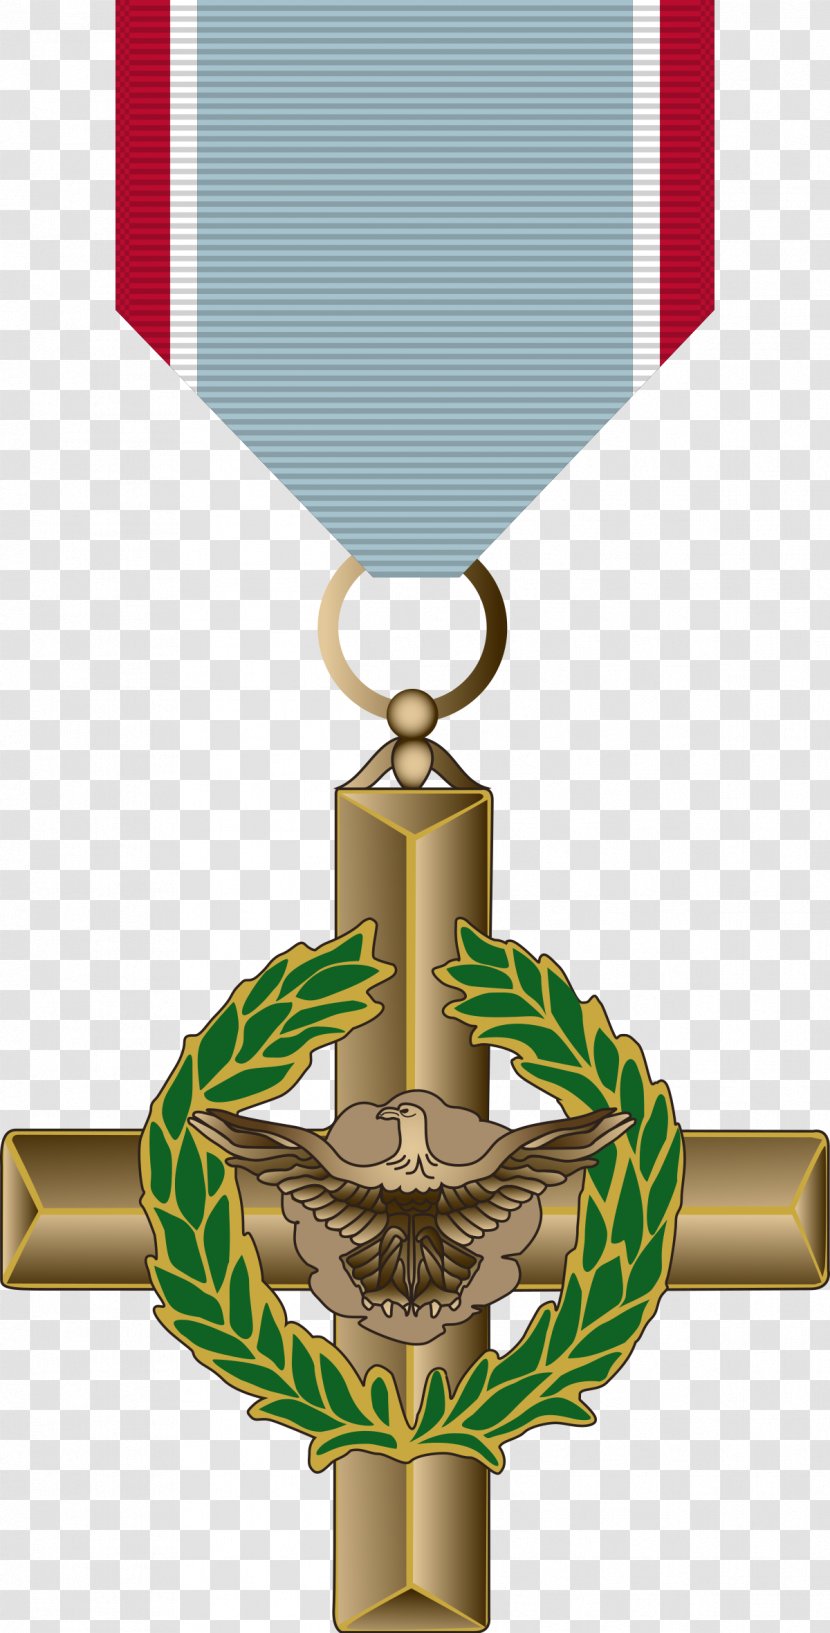 Air Force Cross Military Awards And Decorations United States Distinguished Service - Medal Transparent PNG